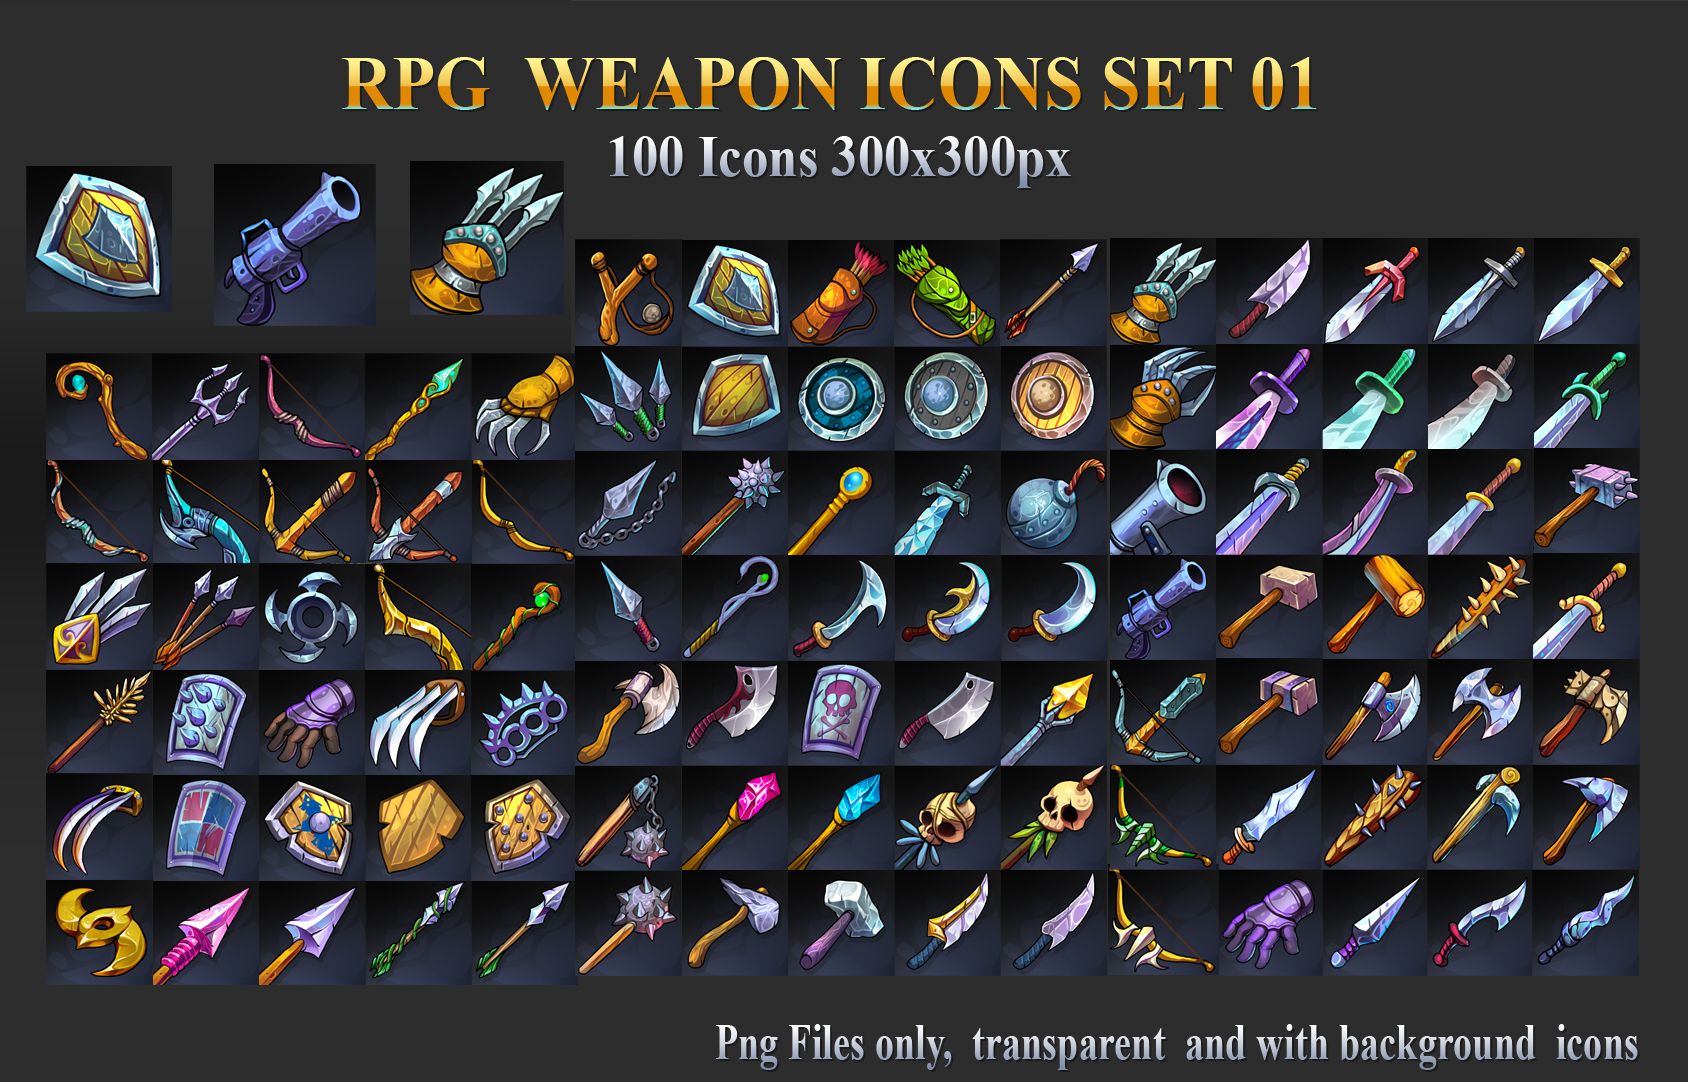 RPG Weapon Icons Set 01 by DionArtworks Codester